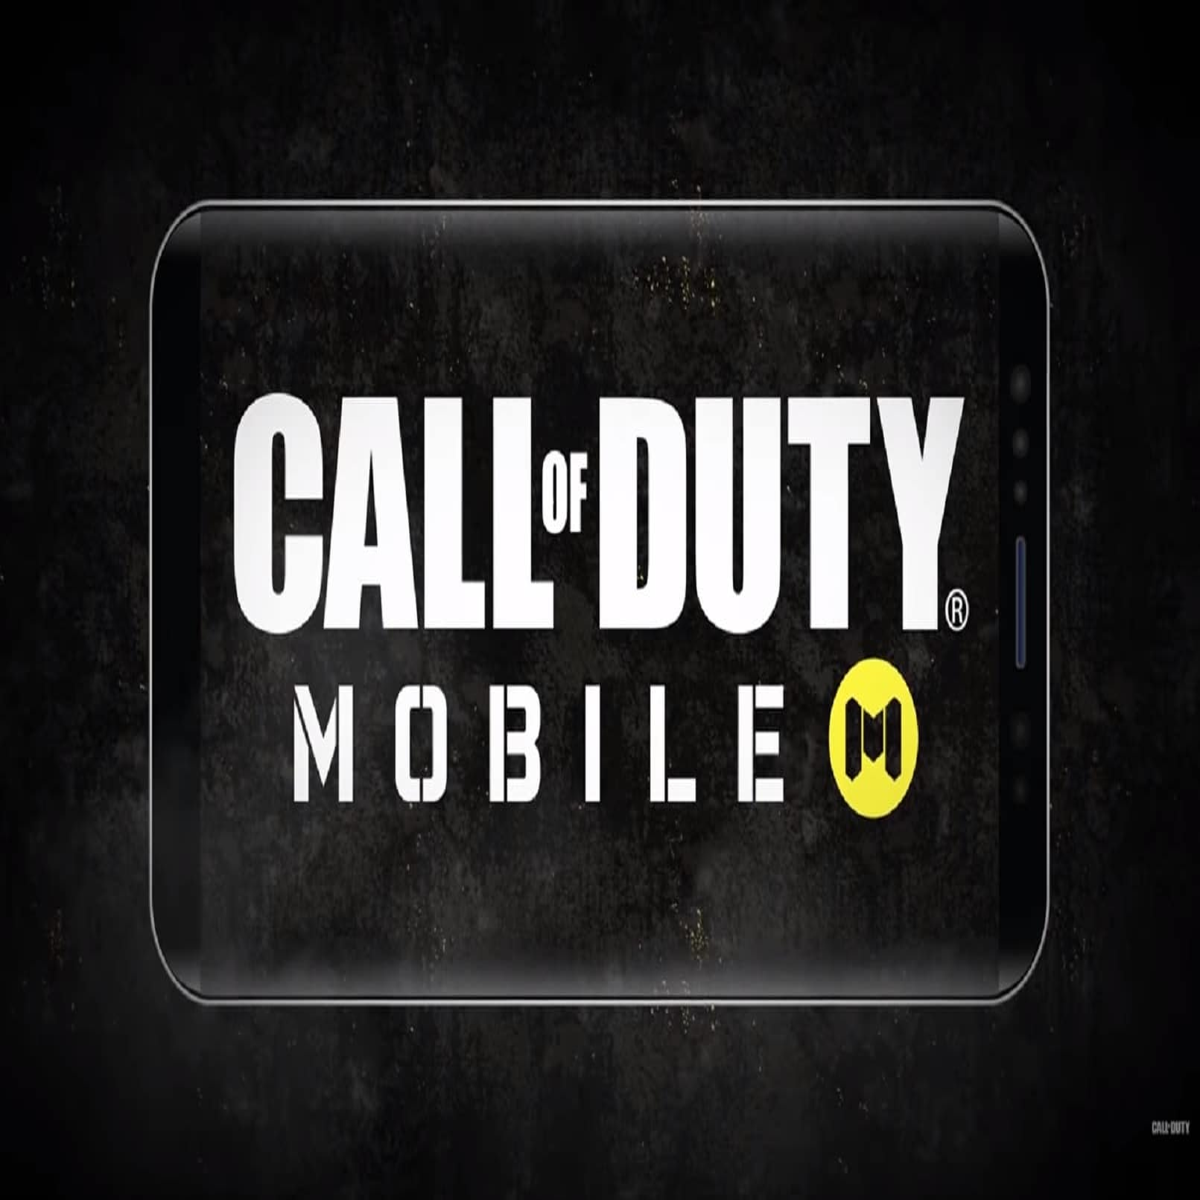 Call of Duty Mobile sees best first-week downloads of any mobile